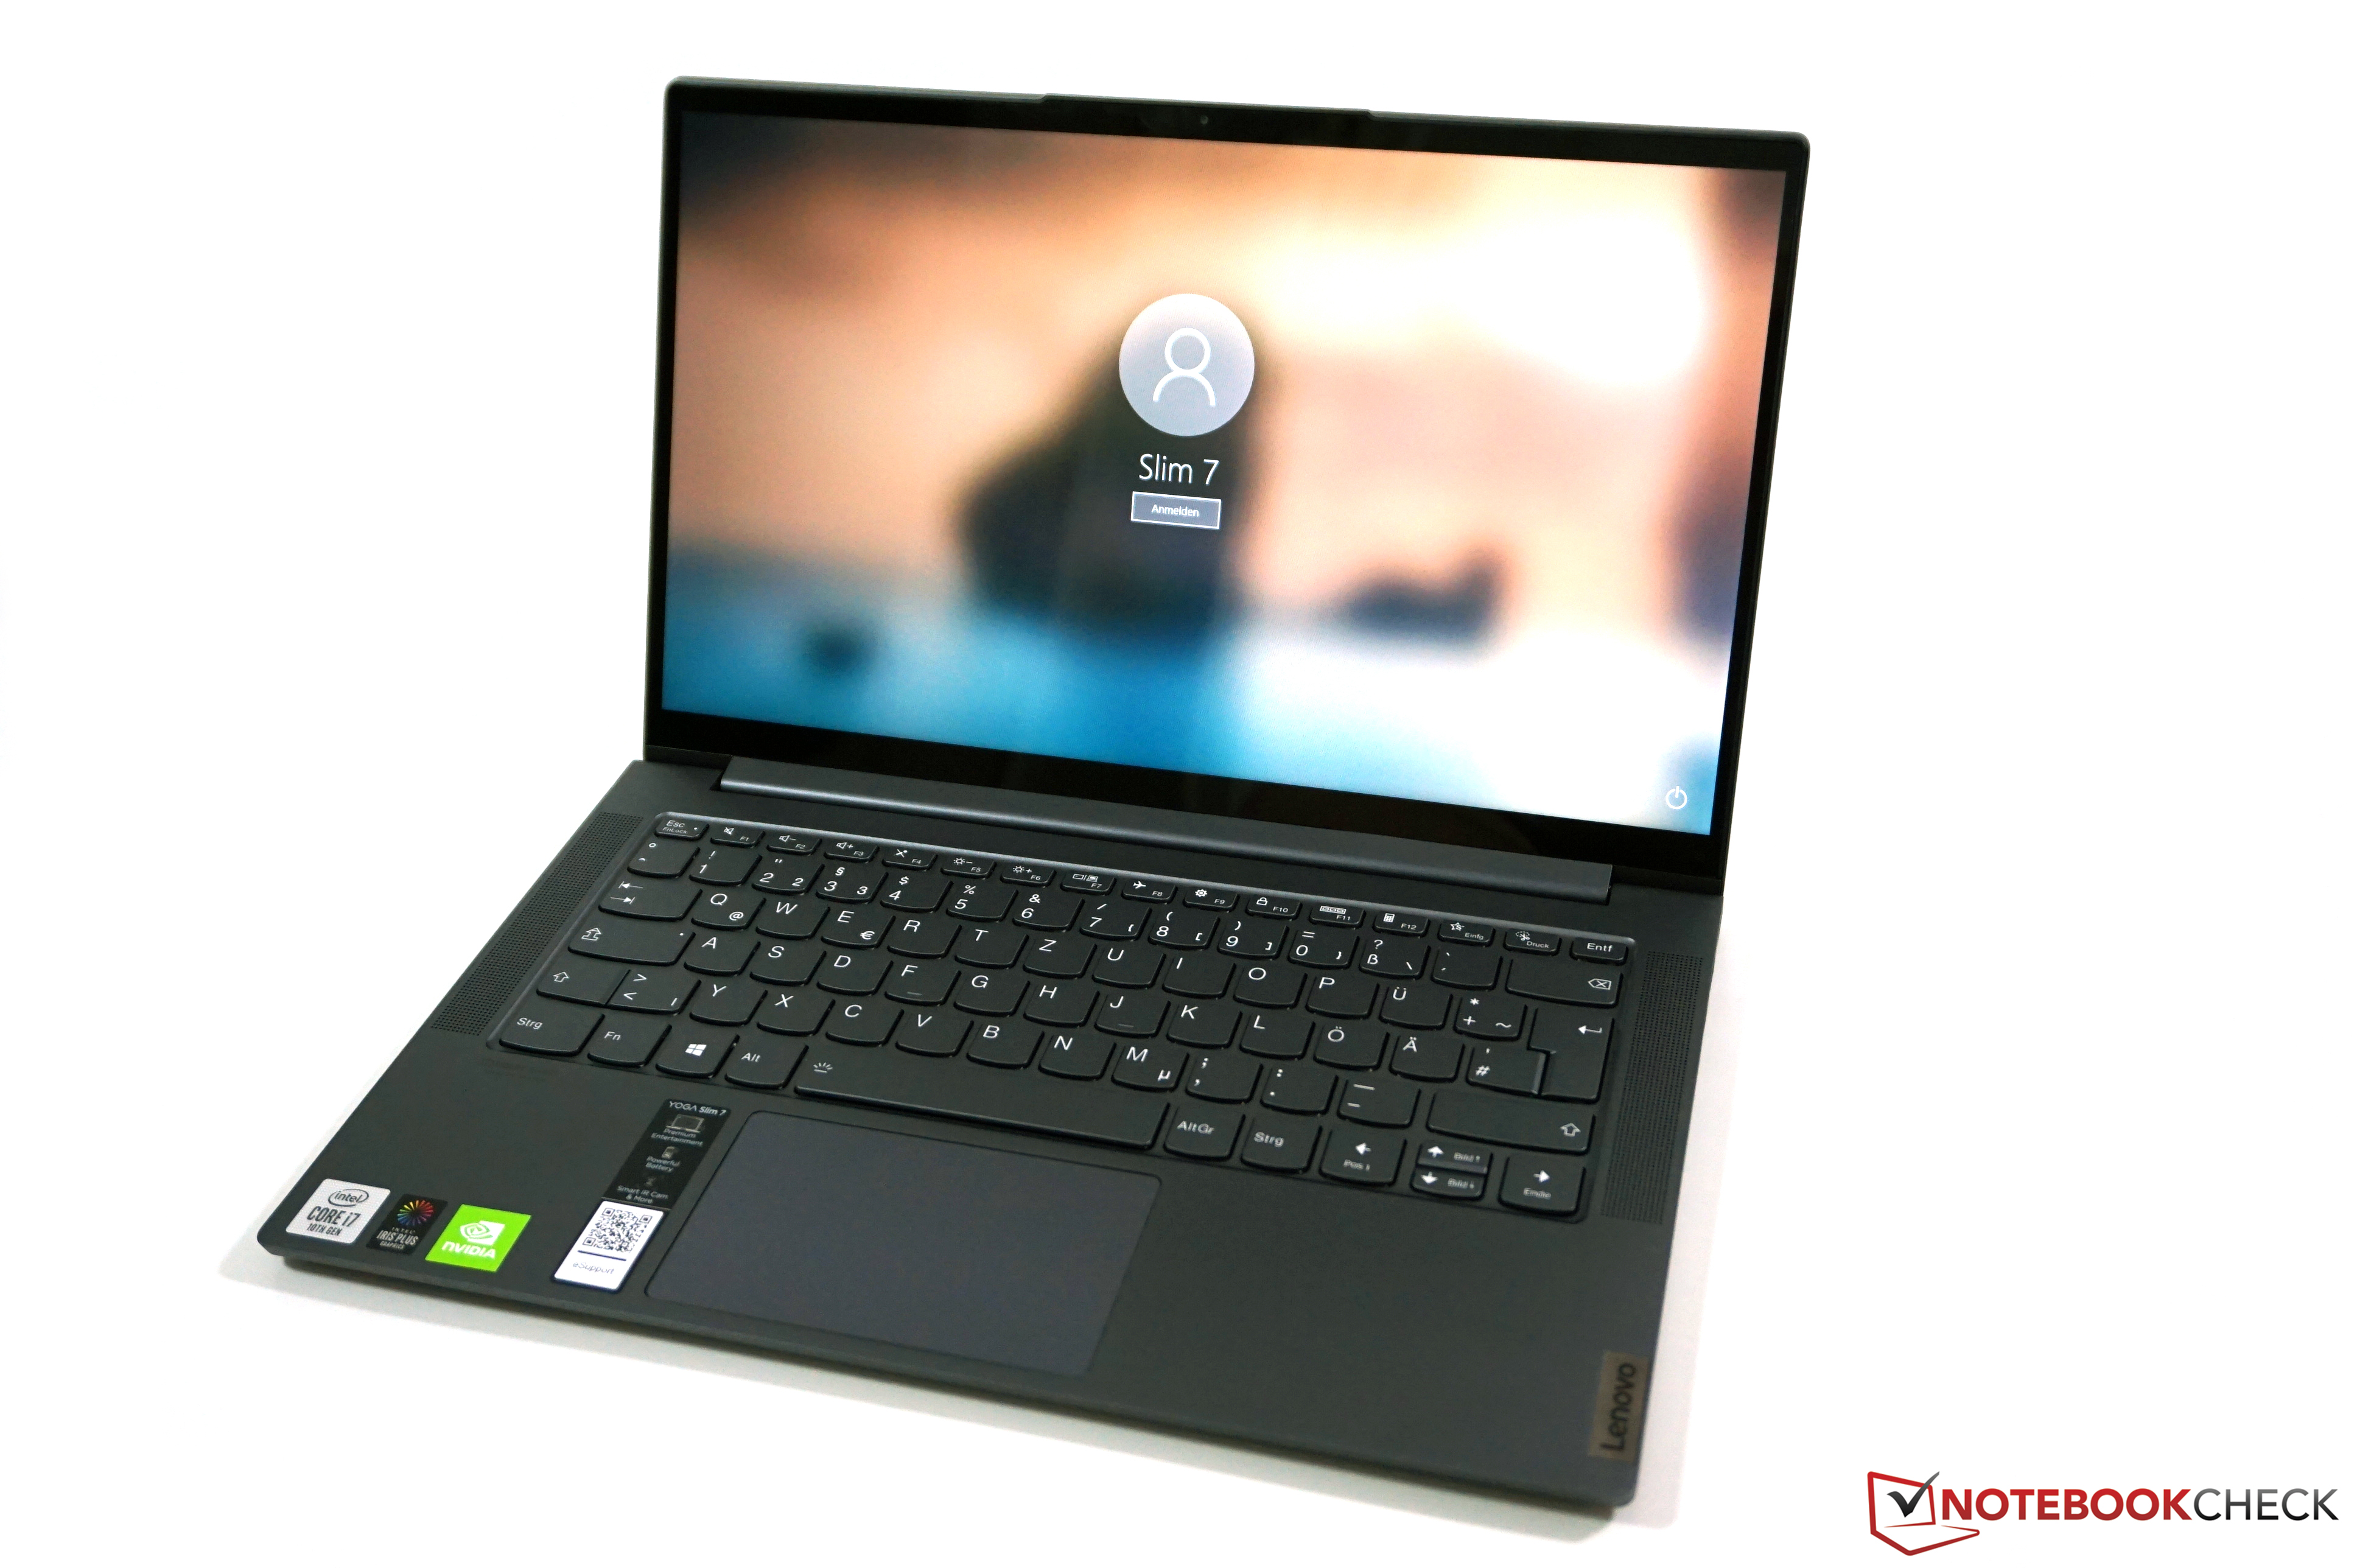 Lenovo Yoga Slim 7 14 laptop review - With GPU against AMD - NotebookCheck.net